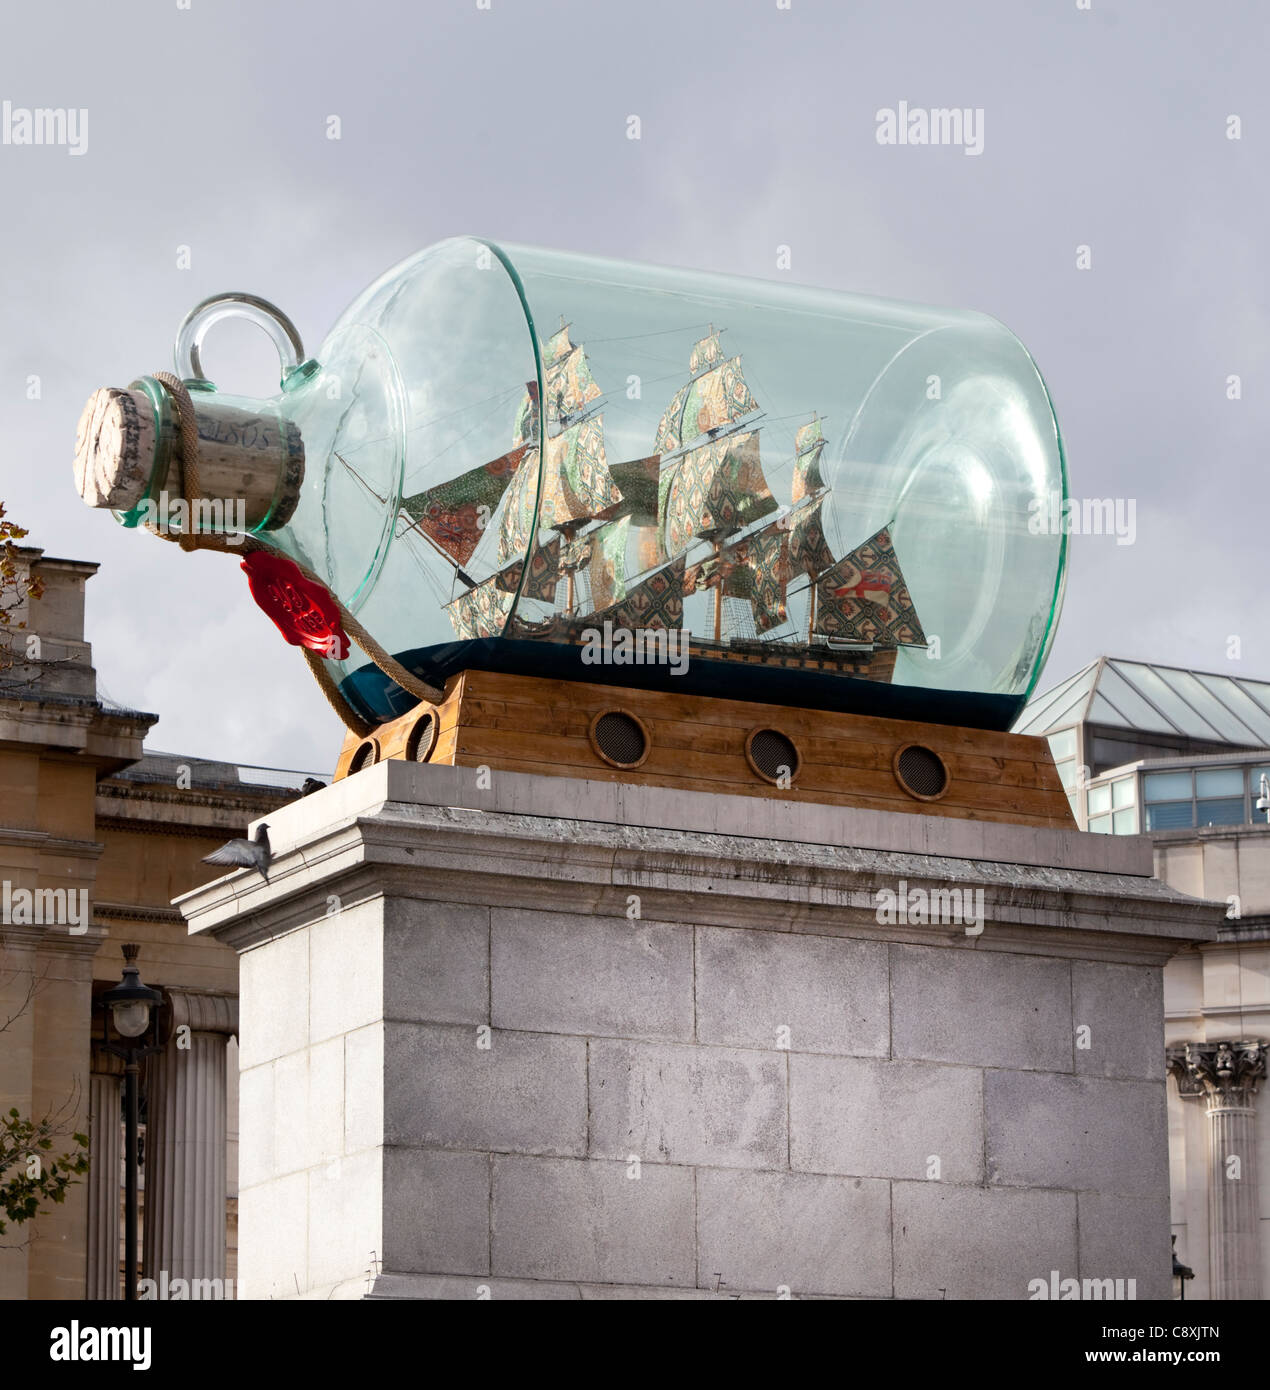 (Yinka Shonibare's) Nelson's ship in a bottle on the fourth plinth in Trafalgar Square, London, England, UK, GB Stock Photo